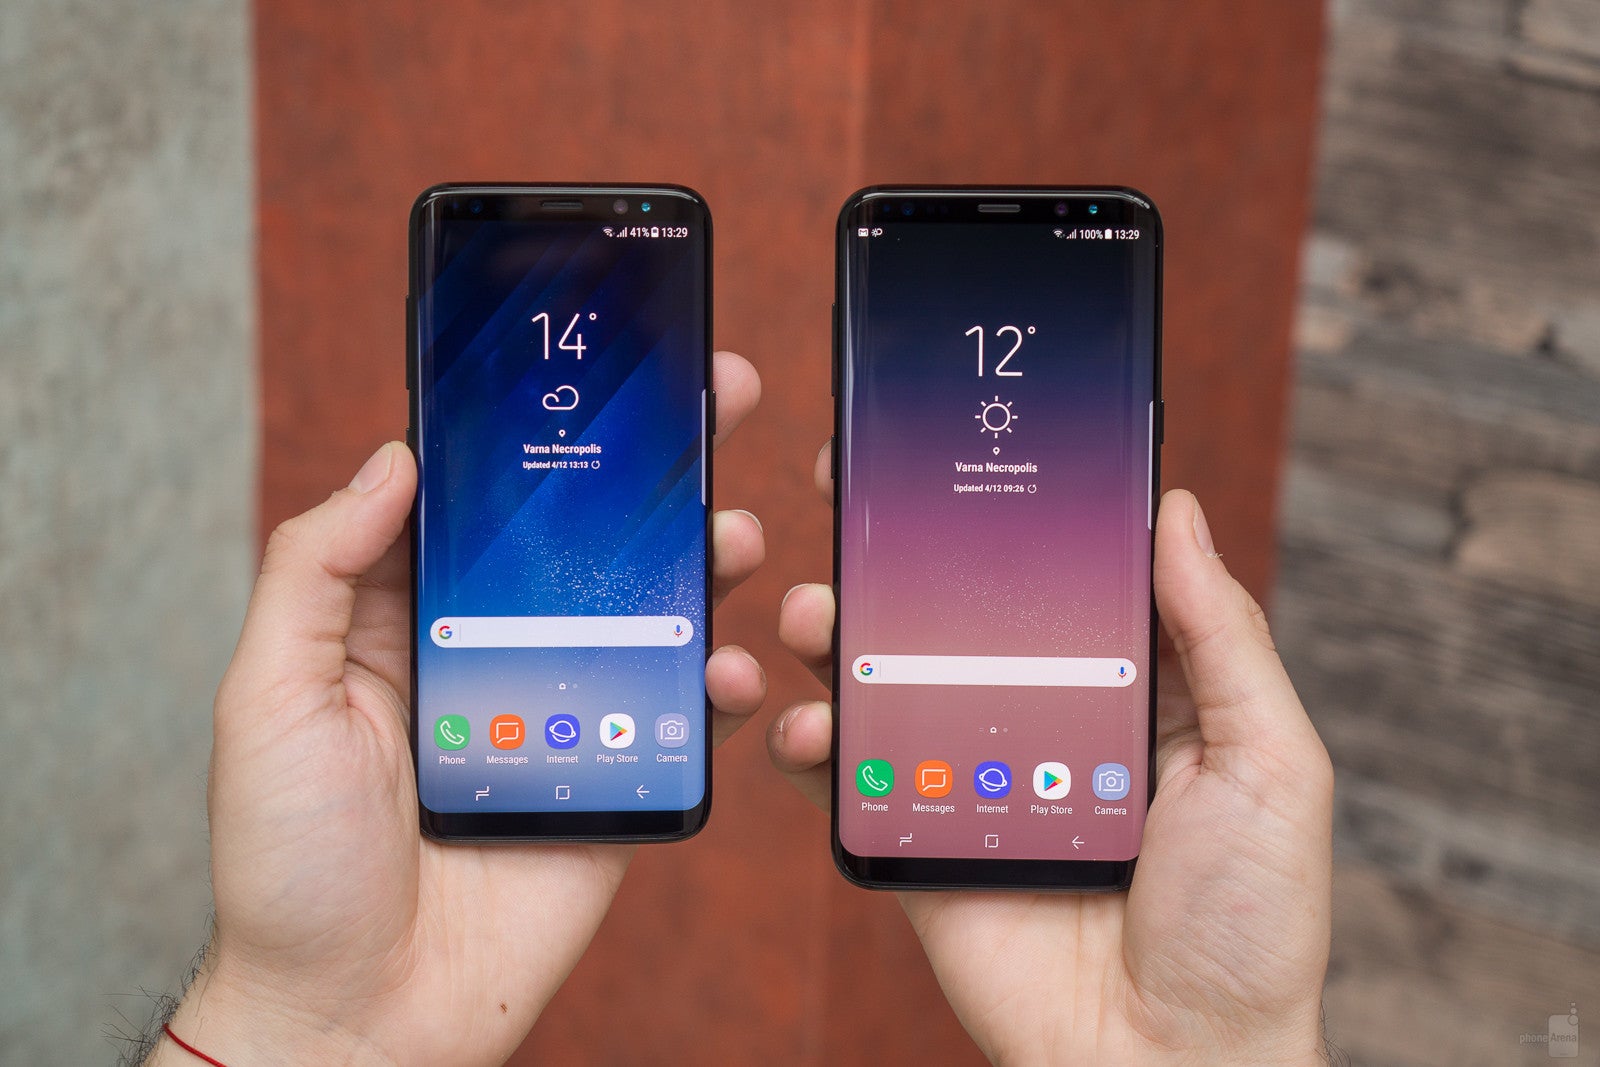 Galaxy S8 (left) vs Galaxy S8+ (right) - Samsung Galaxy S8 and S8+ Q&A: Your questions answered